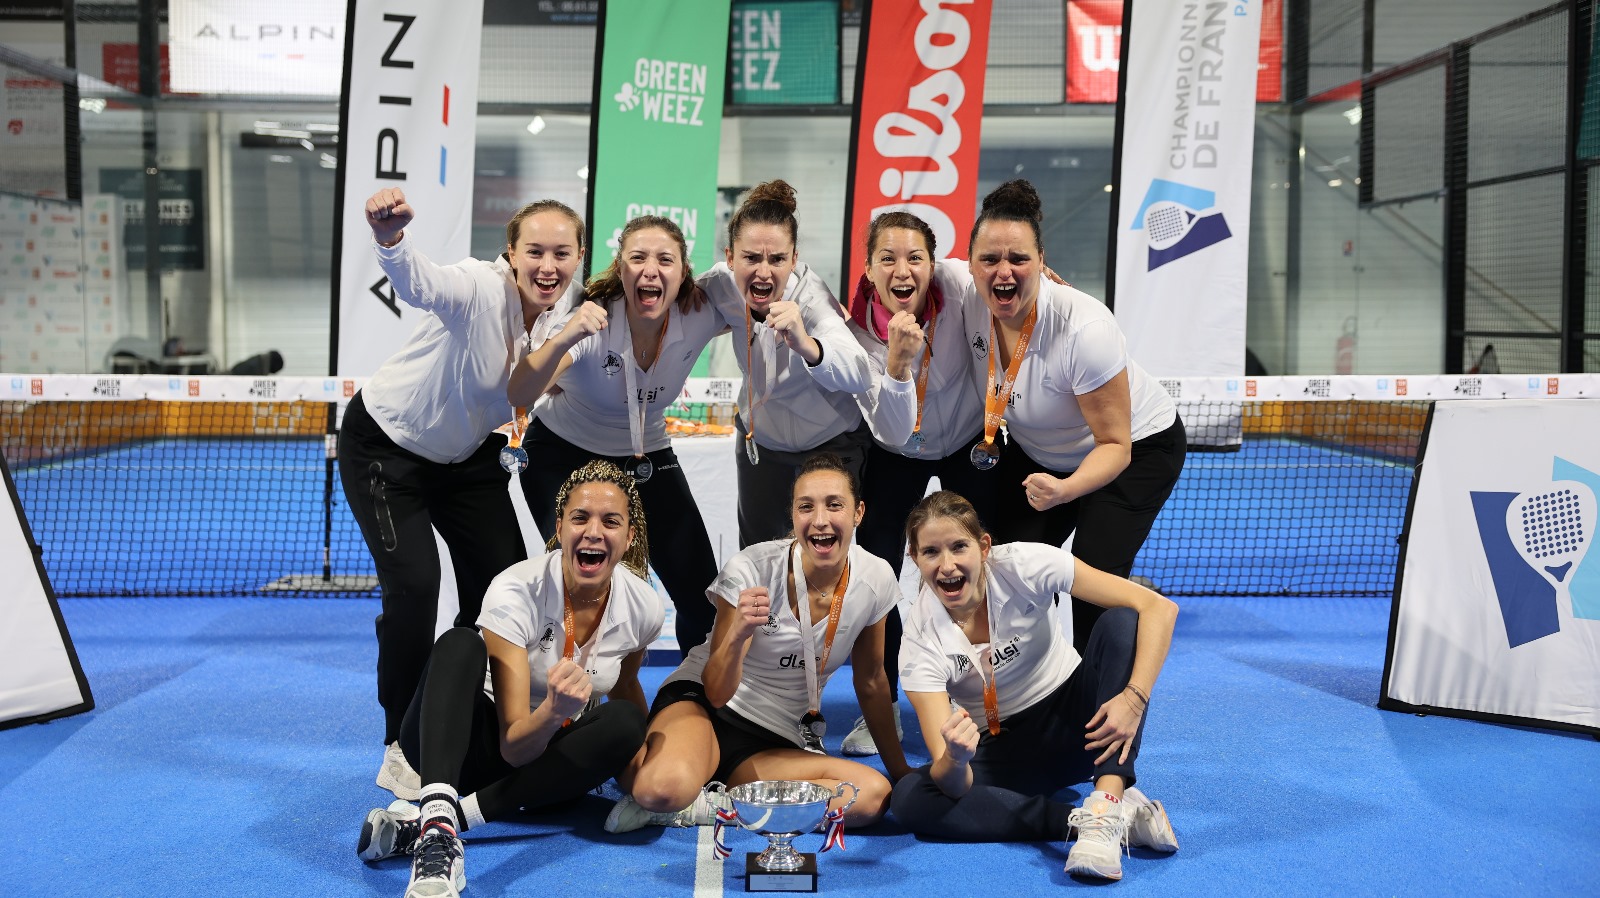 all in Padel wins the 2023 edition of Interclubs N1